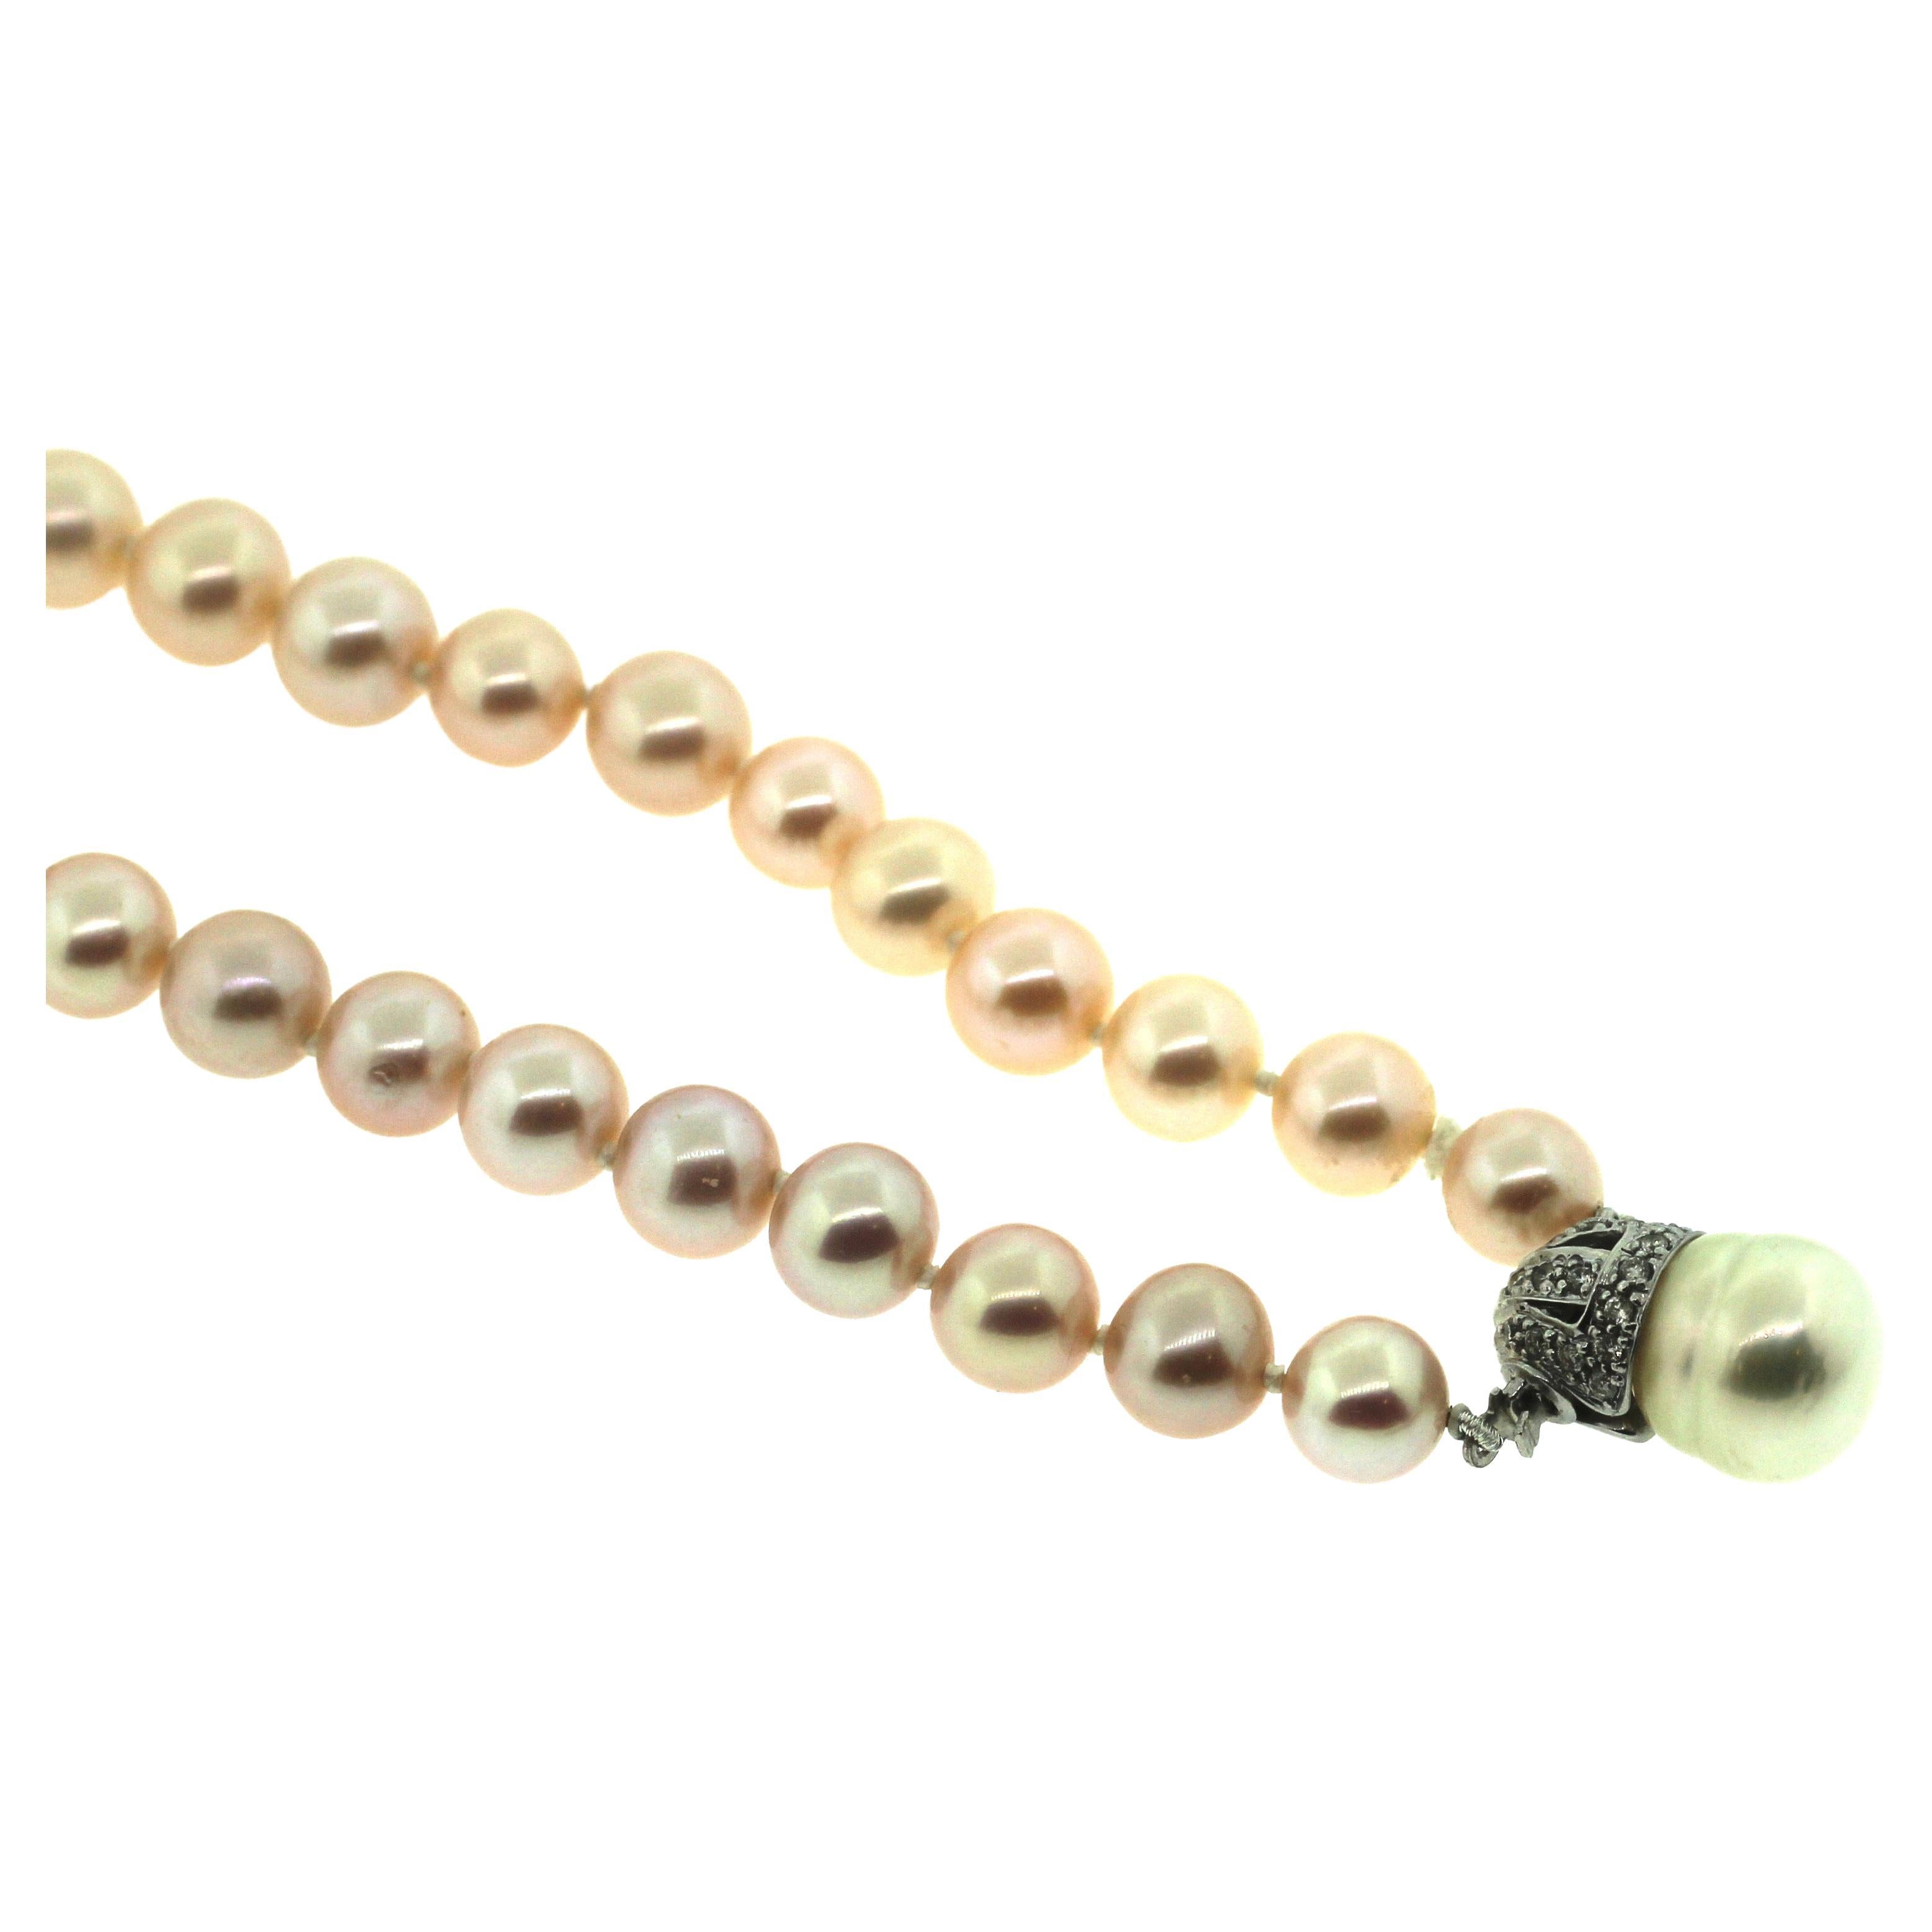 Hakimoto Pink Cultured Pearl Necklace
18K Diamonds Clacp
16.5 inches
8-7mm